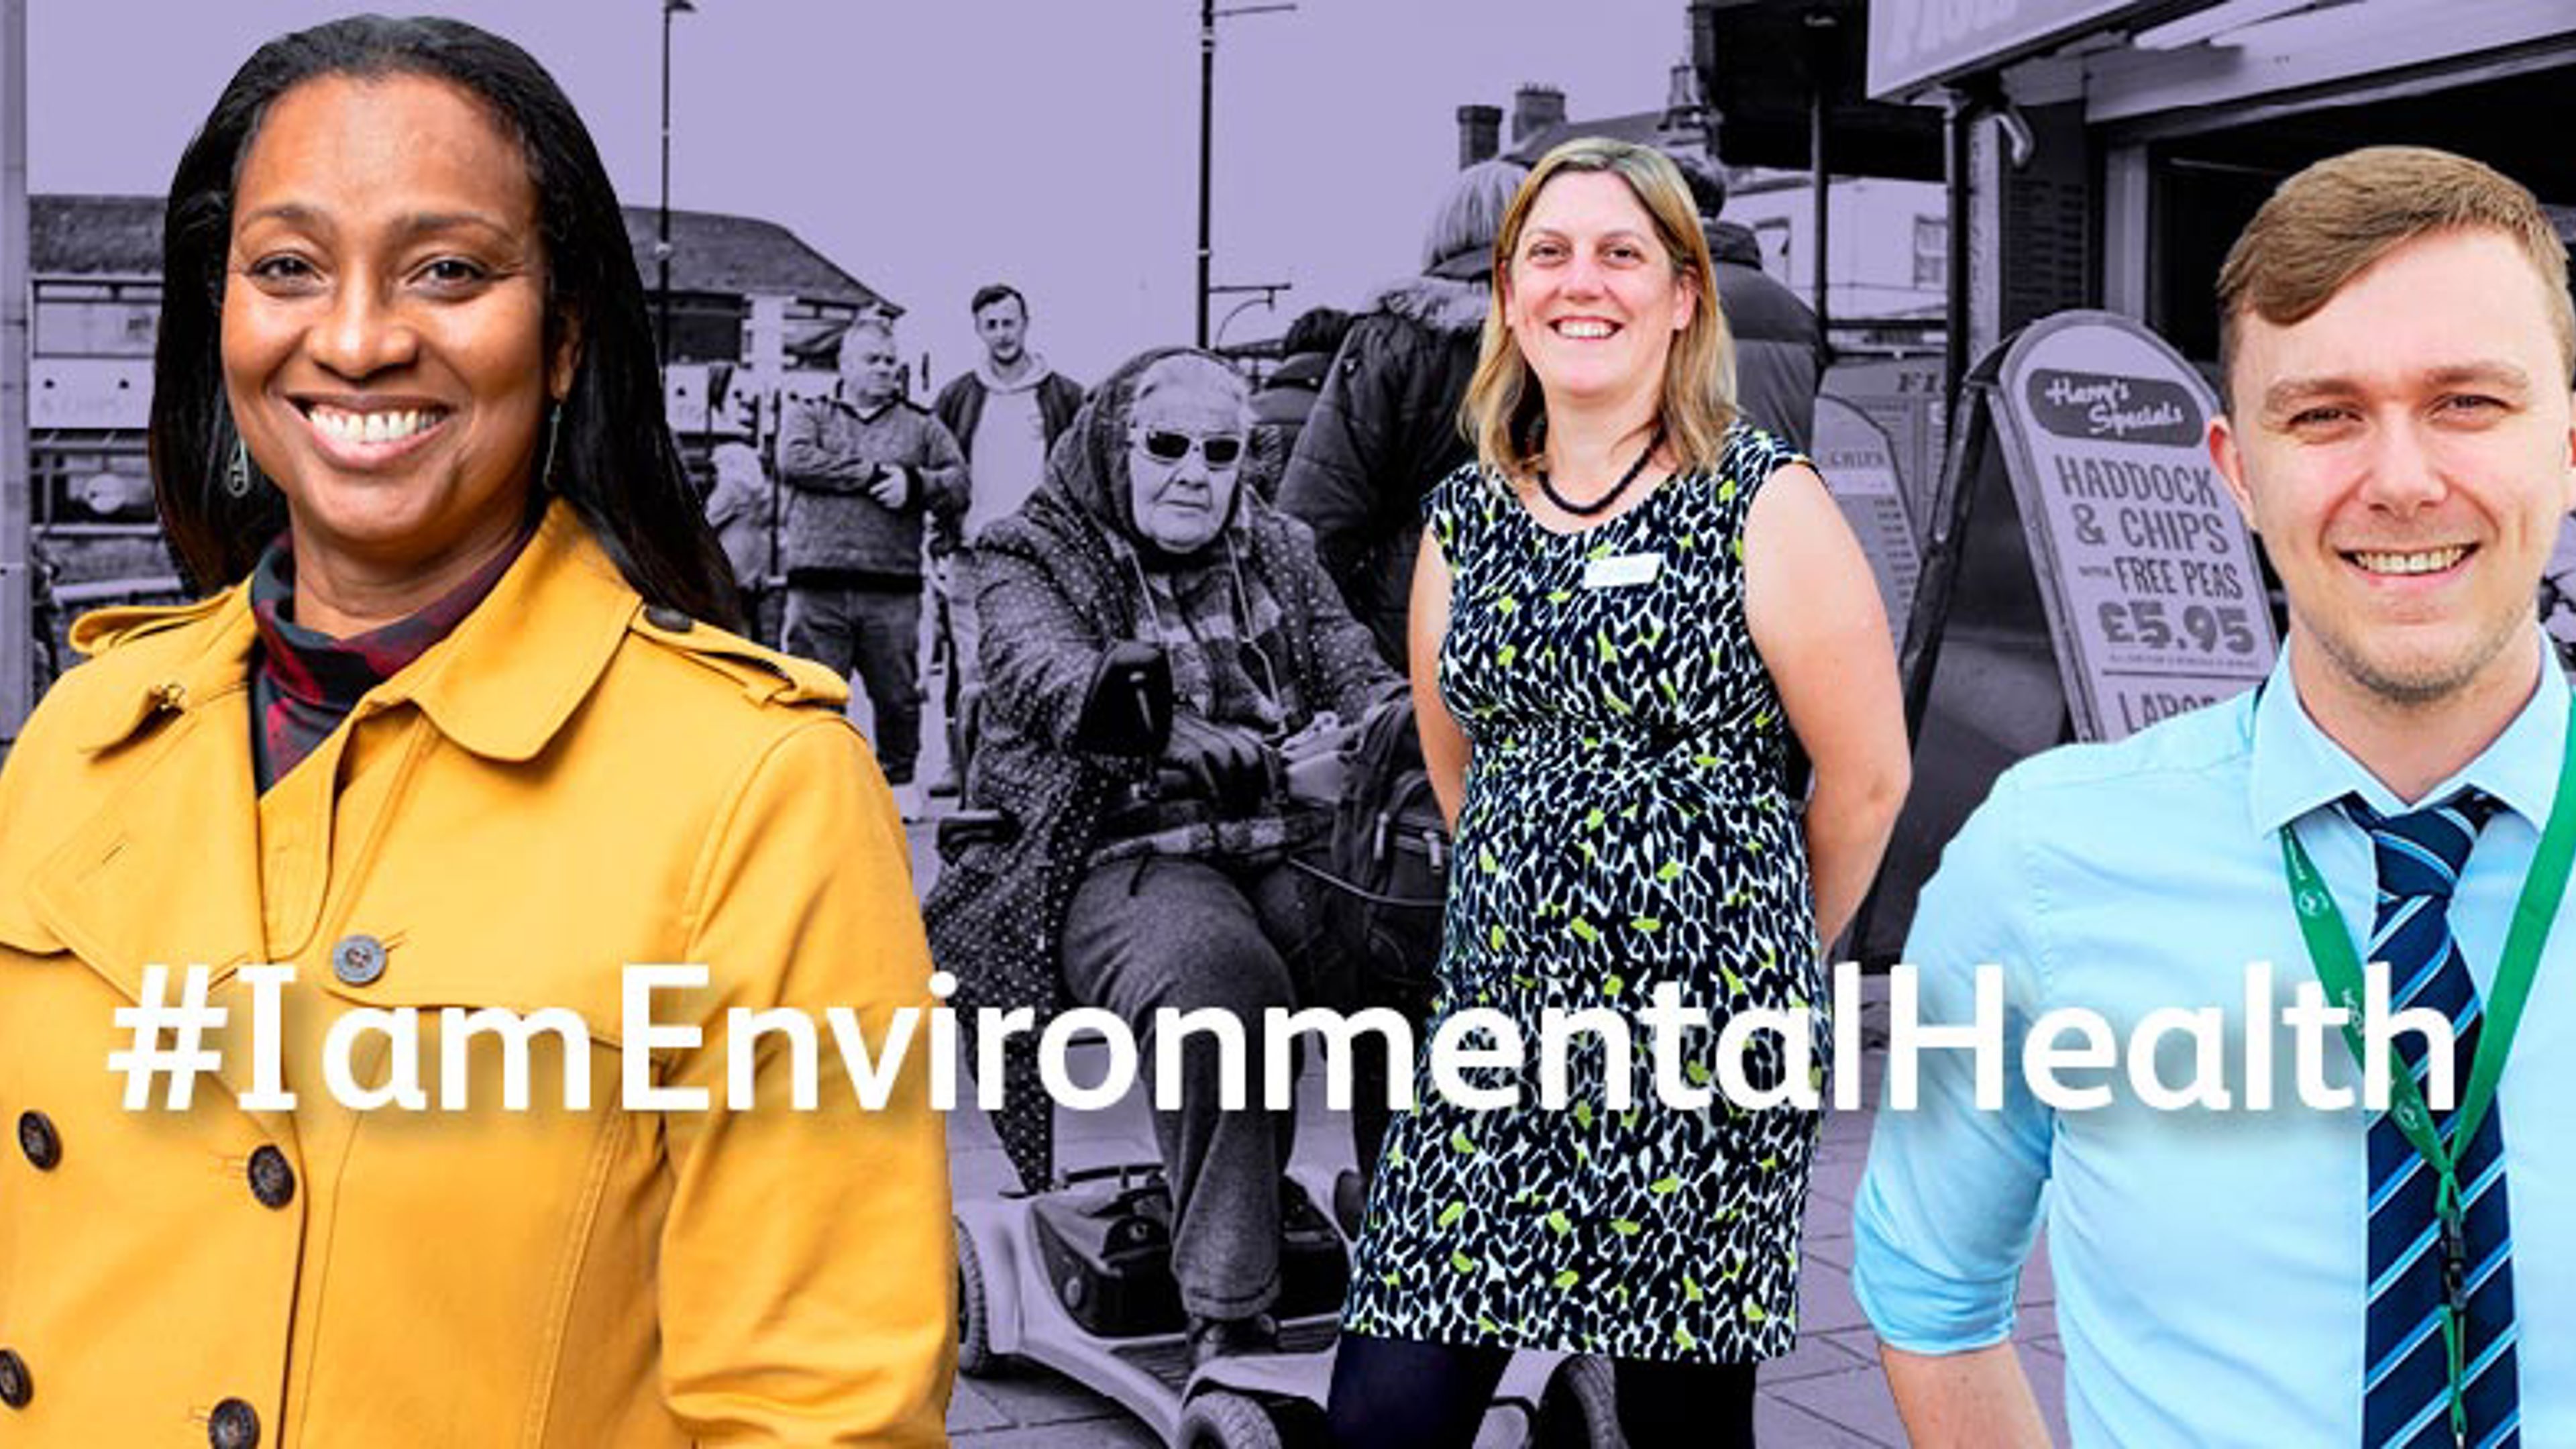 New campaign to promote environmental health